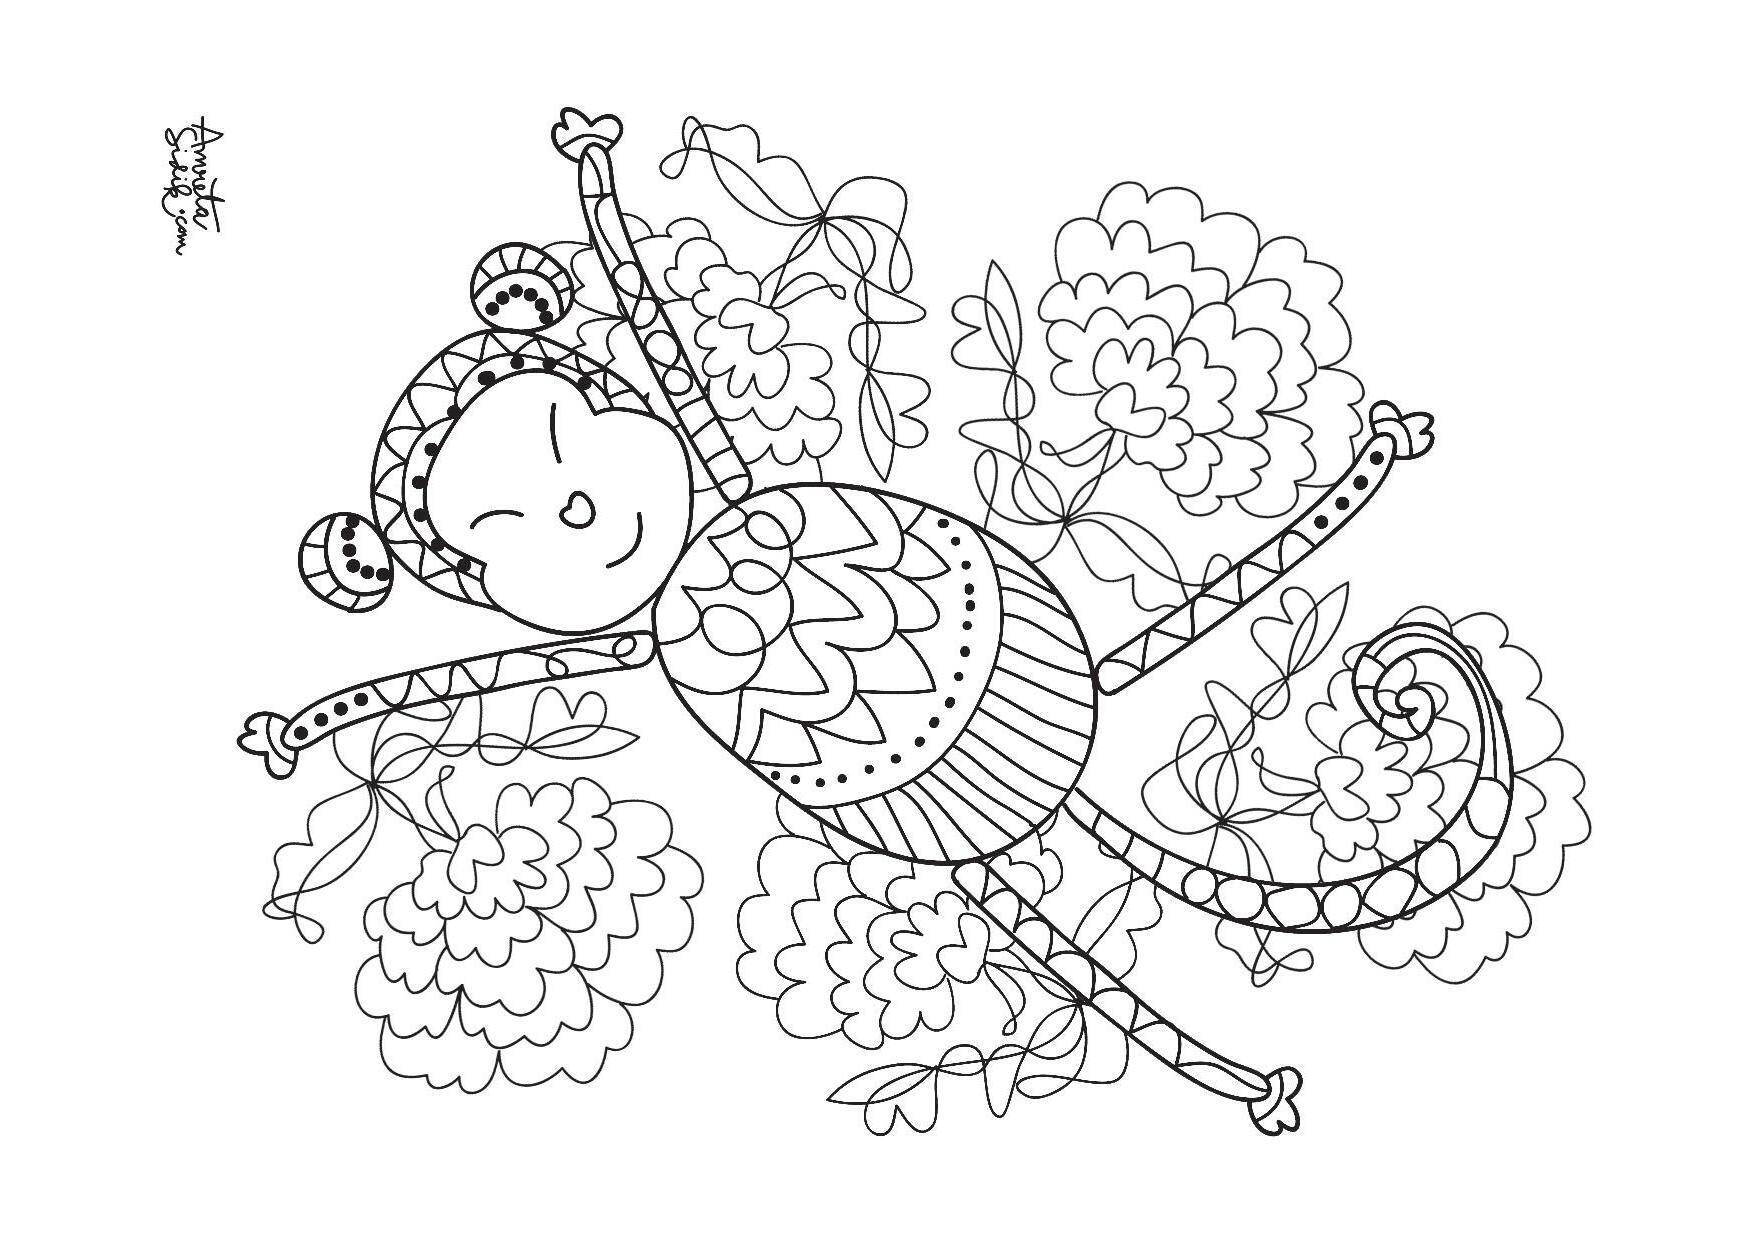 Zen and Anti stress - Coloring Pages for adults